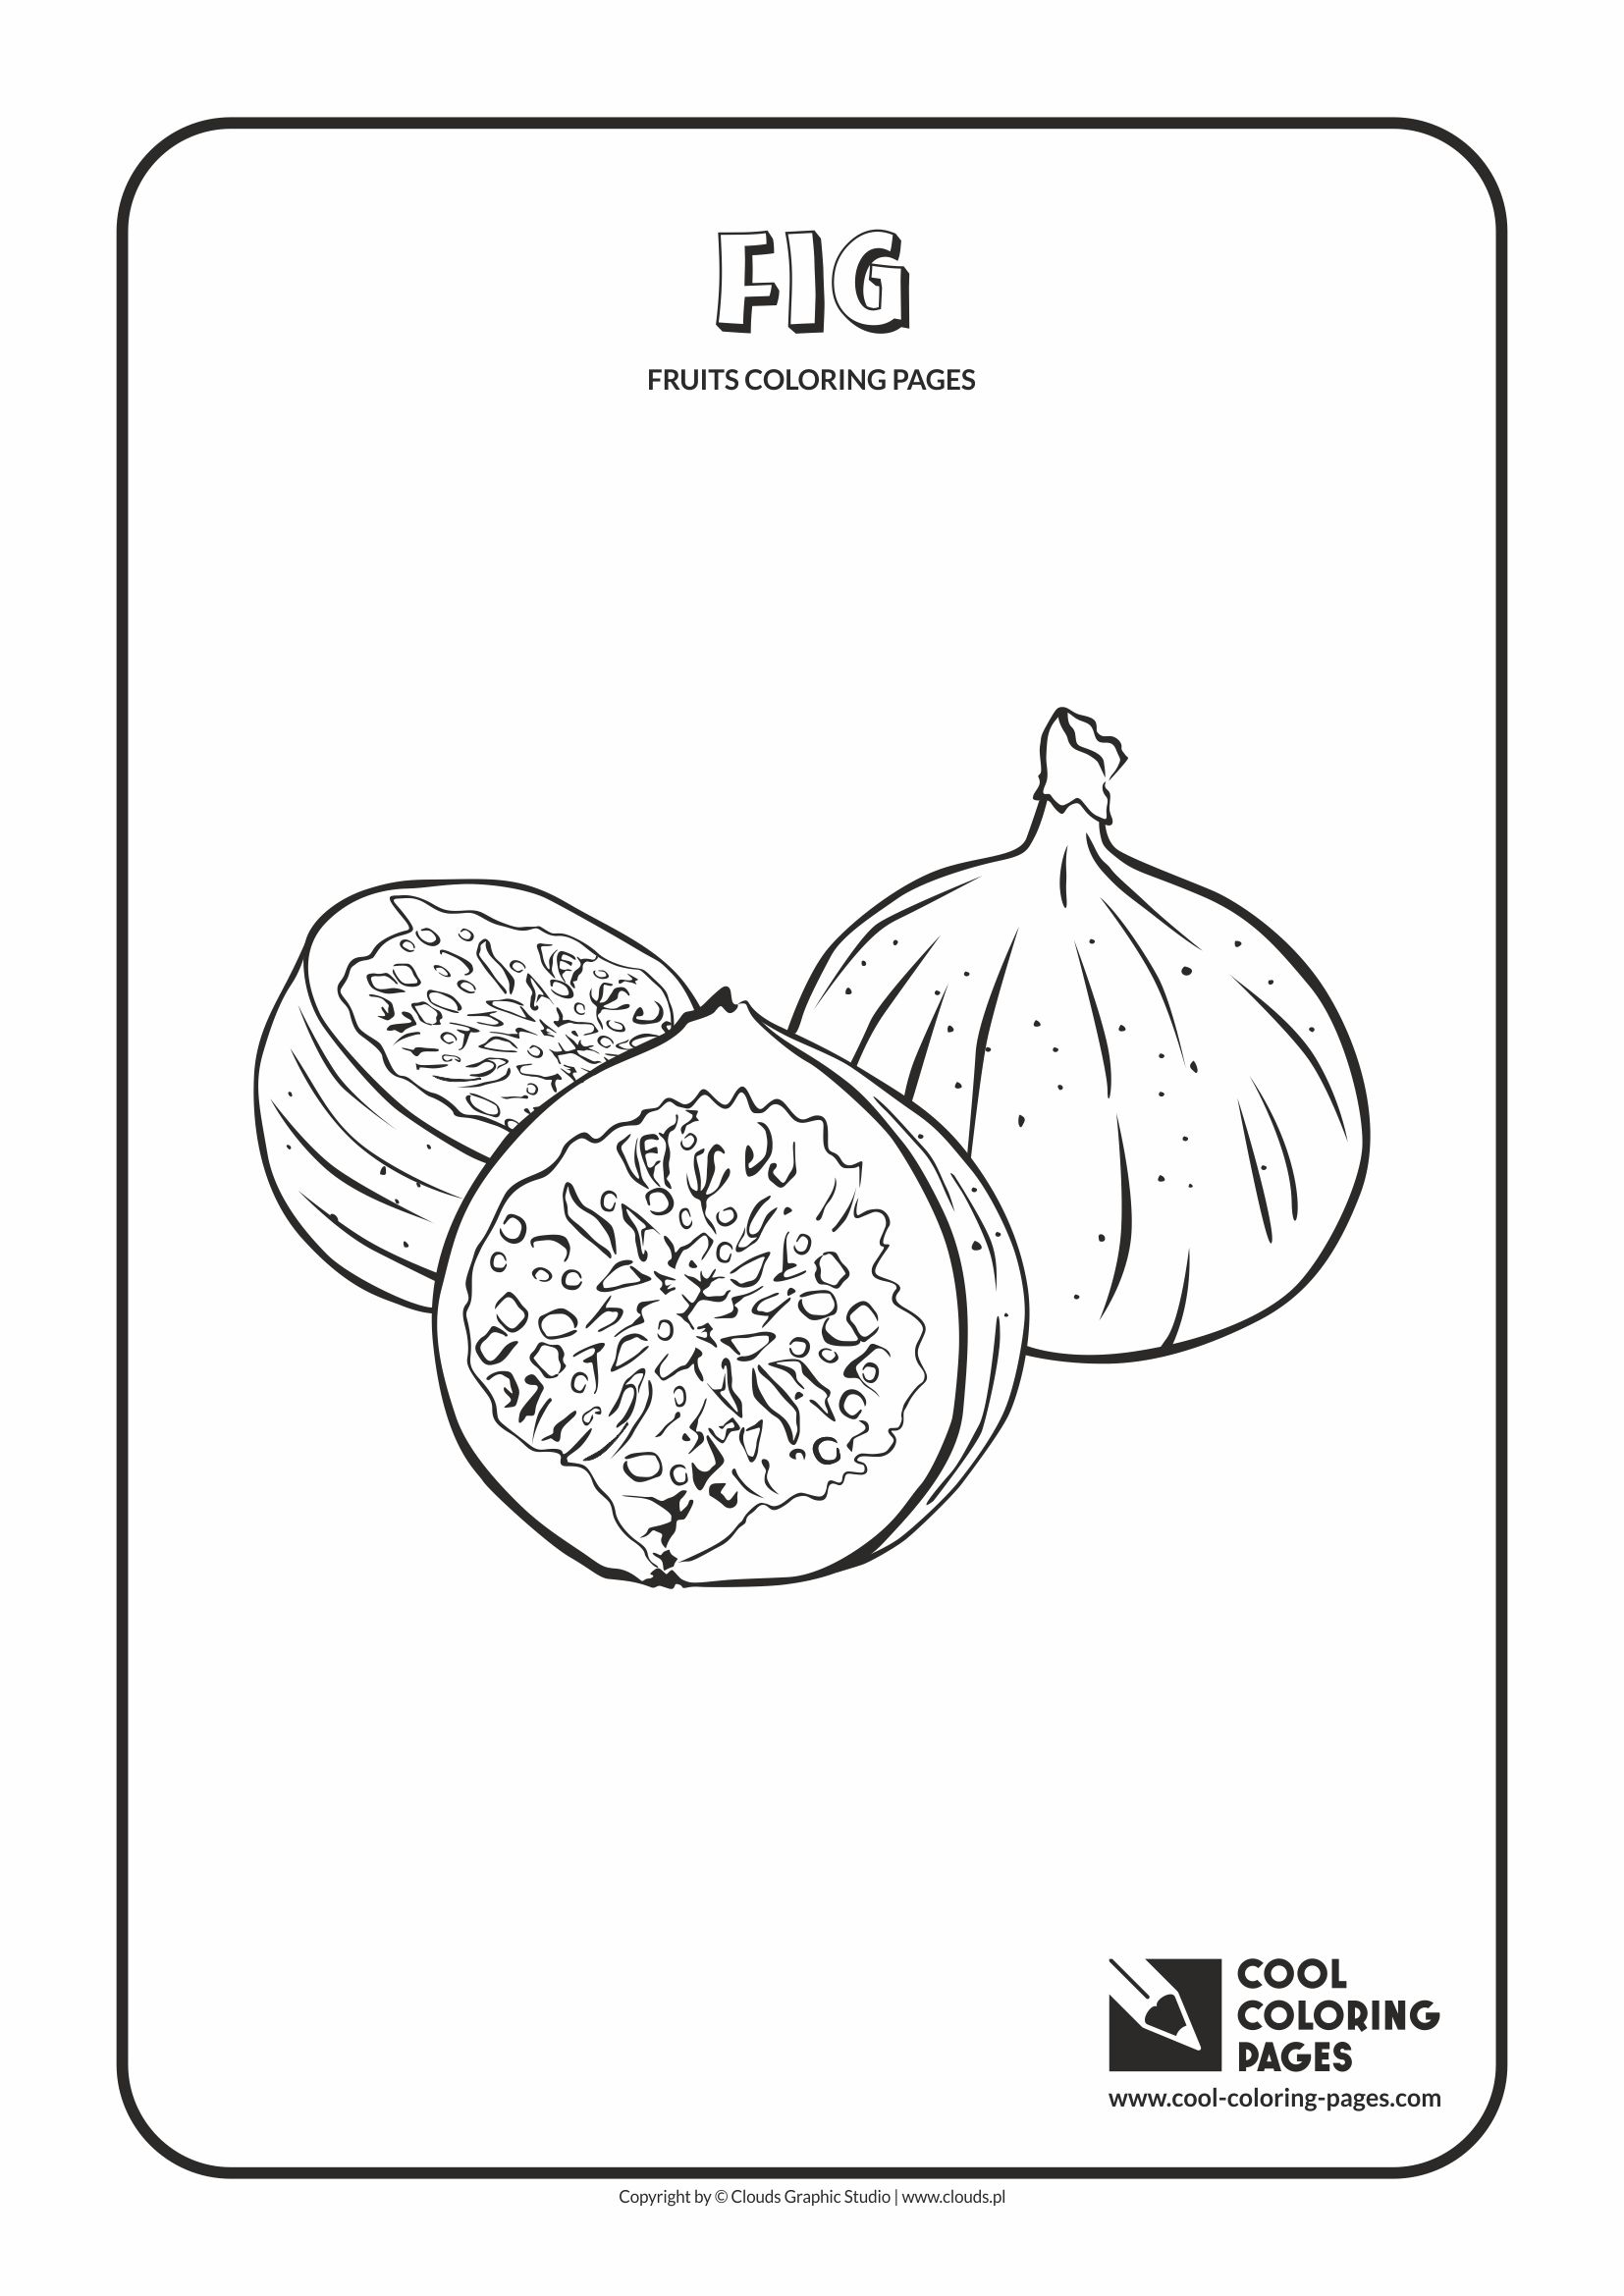 Cool Coloring Pages - Plants / Fig / Coloring page with fig